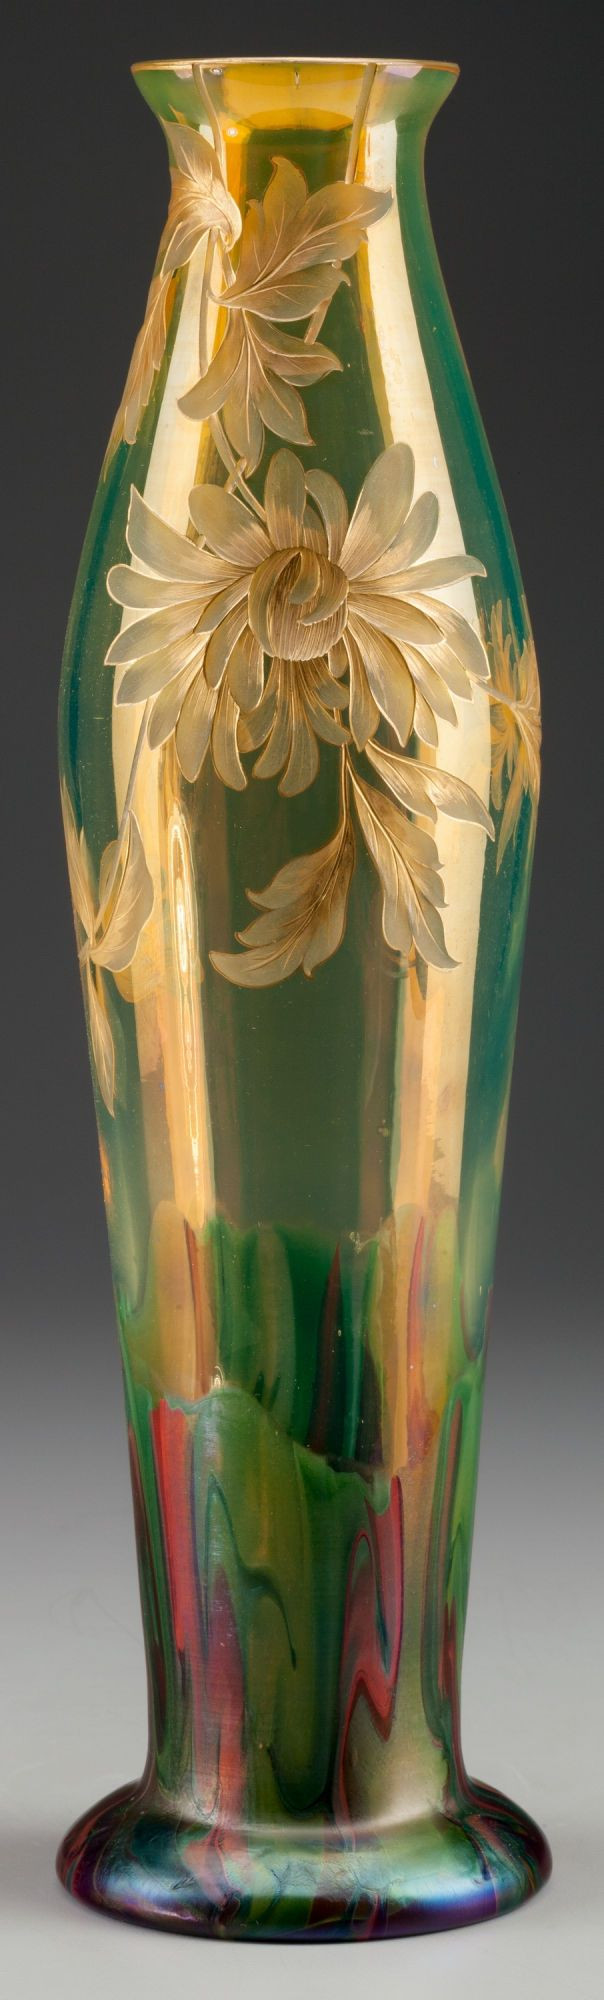 27 Great Antique Hyacinth Vases for Sale 2023 free download antique hyacinth vases for sale of 138 best vases images on pinterest art nouveau glass art and art regarding rare graf harrach enameled and engraved opalescent glass floralvase circa marked